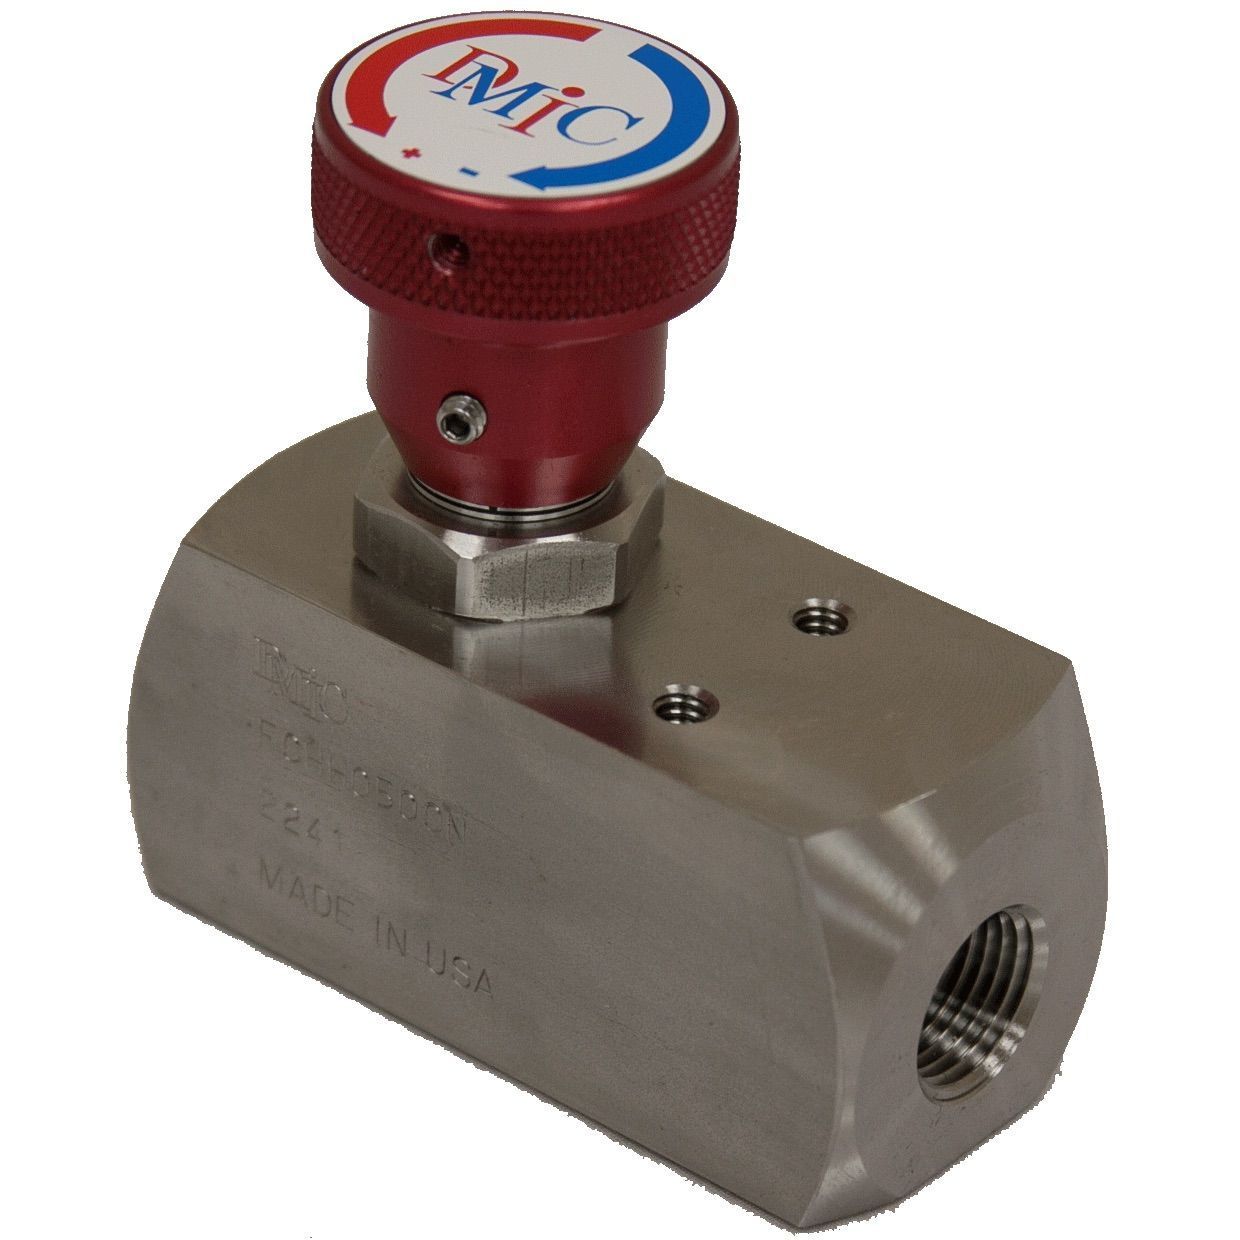 FCHH-0750S-2221 : DMIC Flow Control, Unidirectional, with Integrated Check, #12 SAE (3/4"), 316SS, 10000psi